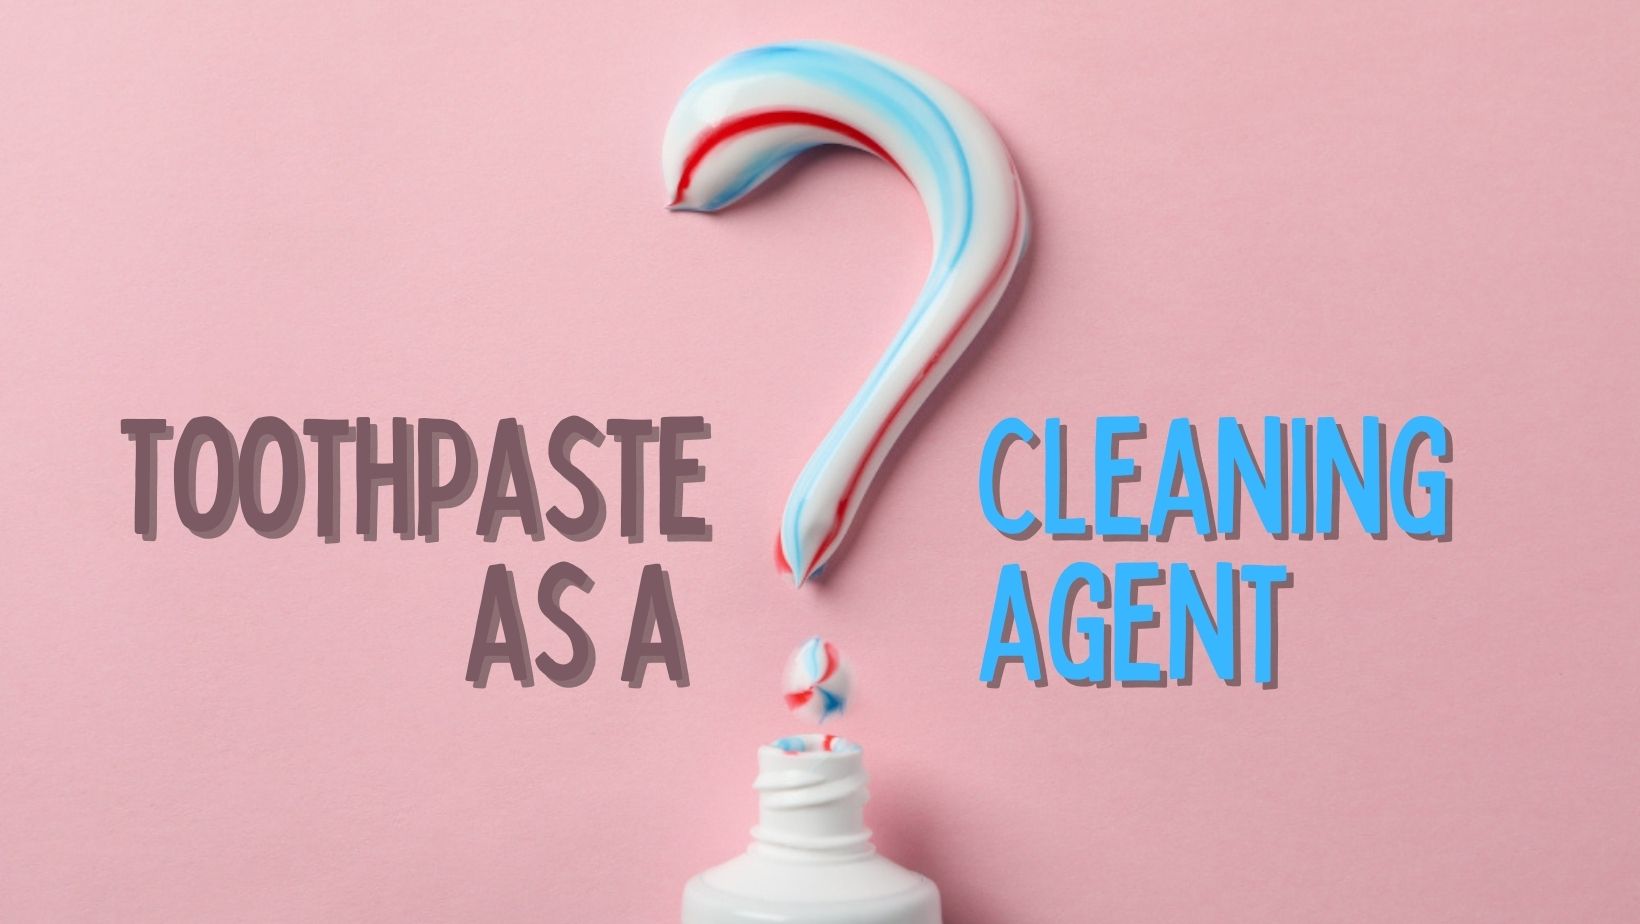 Beyond Shining Teeth 8 Uses of Toothpaste as a Cleaning Agent